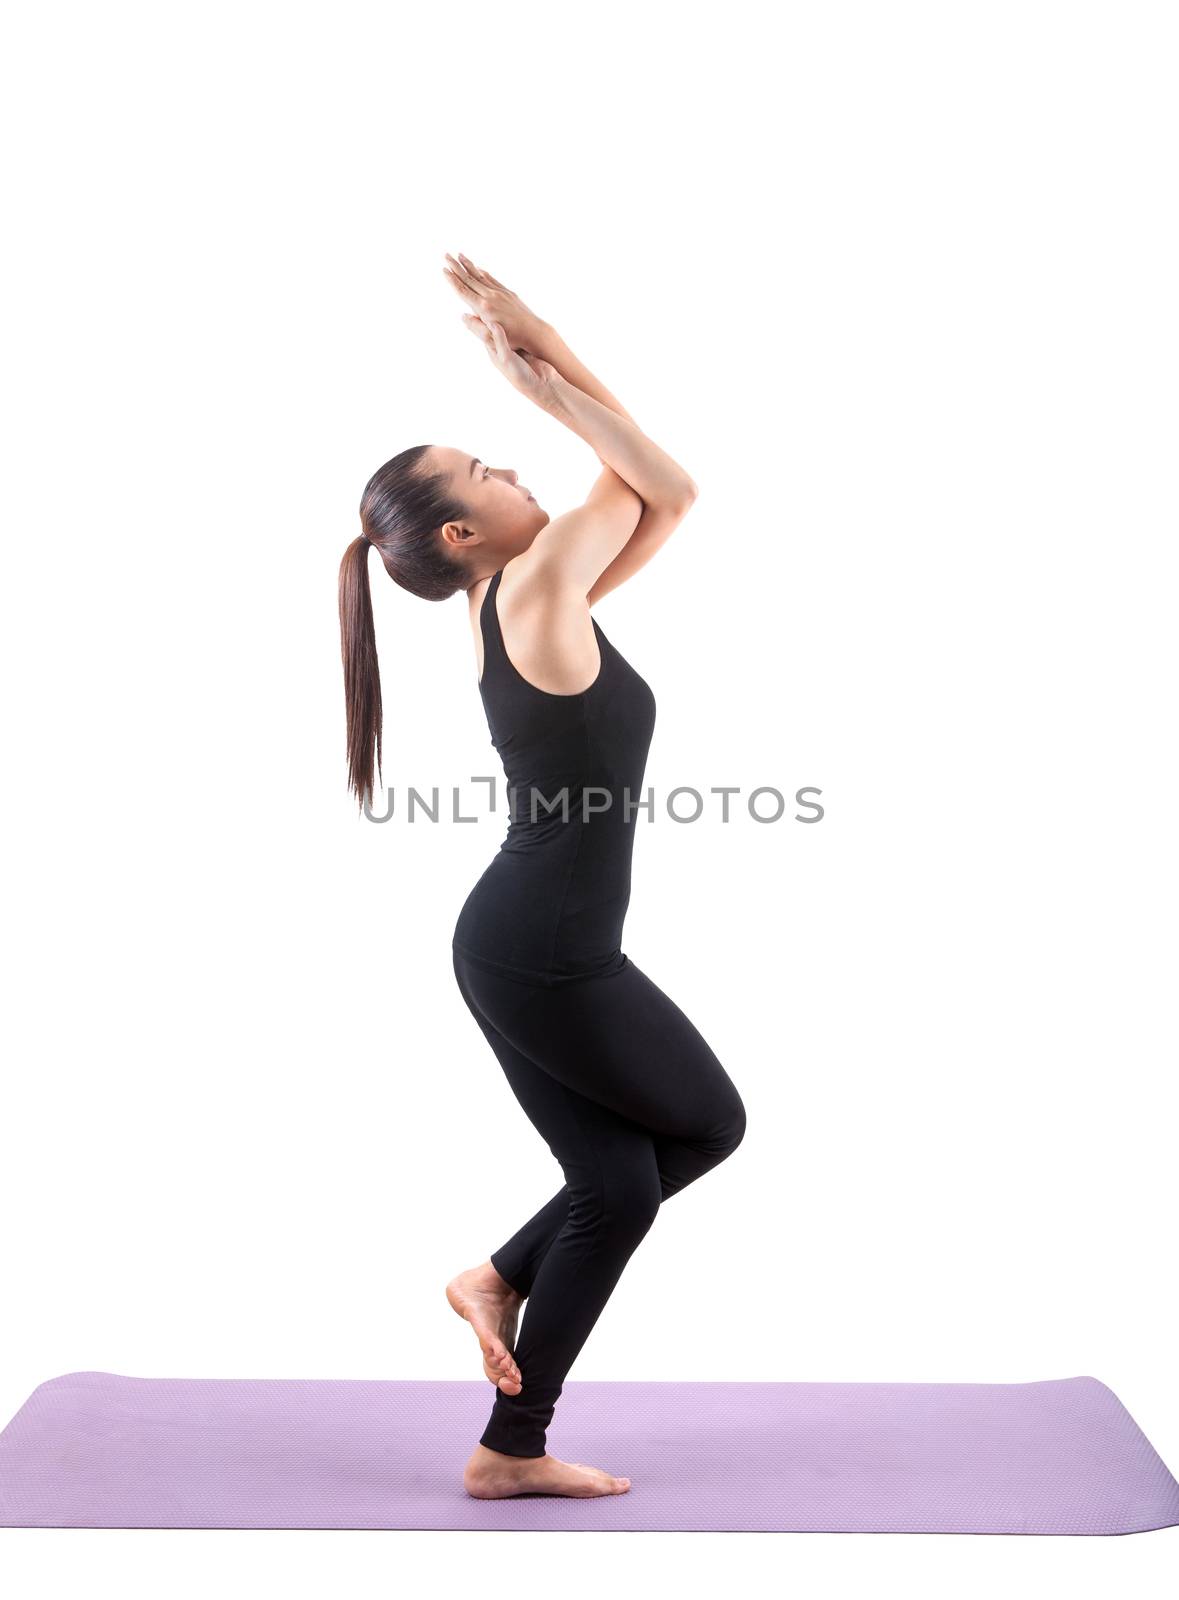 portrait of asian woman wearing black body suit sitting in yoga meditation position isolated white background